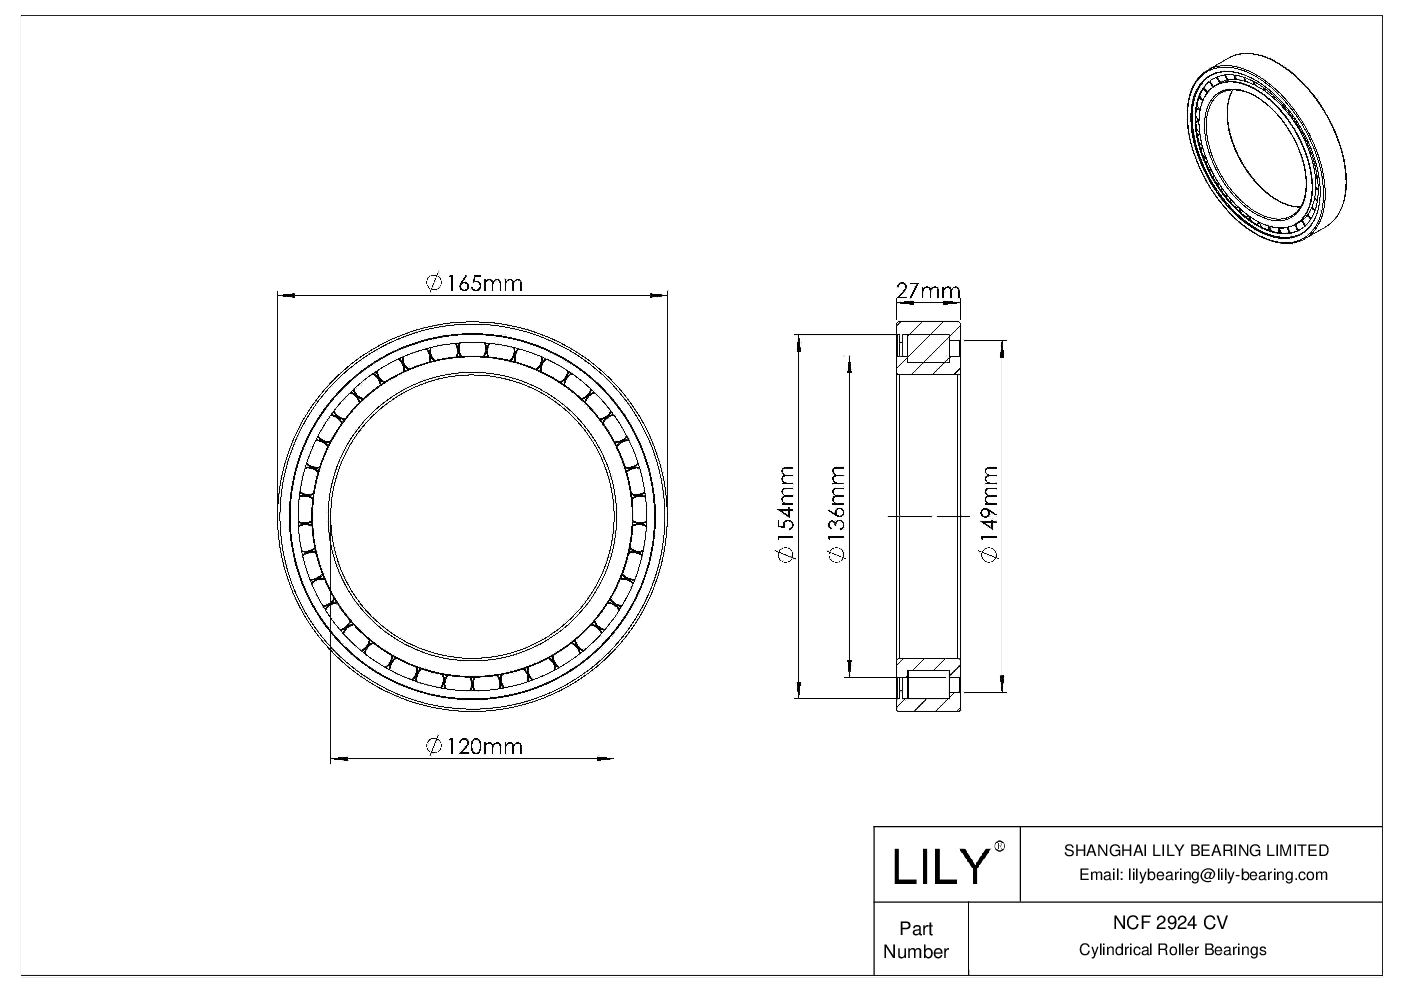 NCF 2924 CV Single Row Full Complement Cylindrical Roller Bearings cad drawing